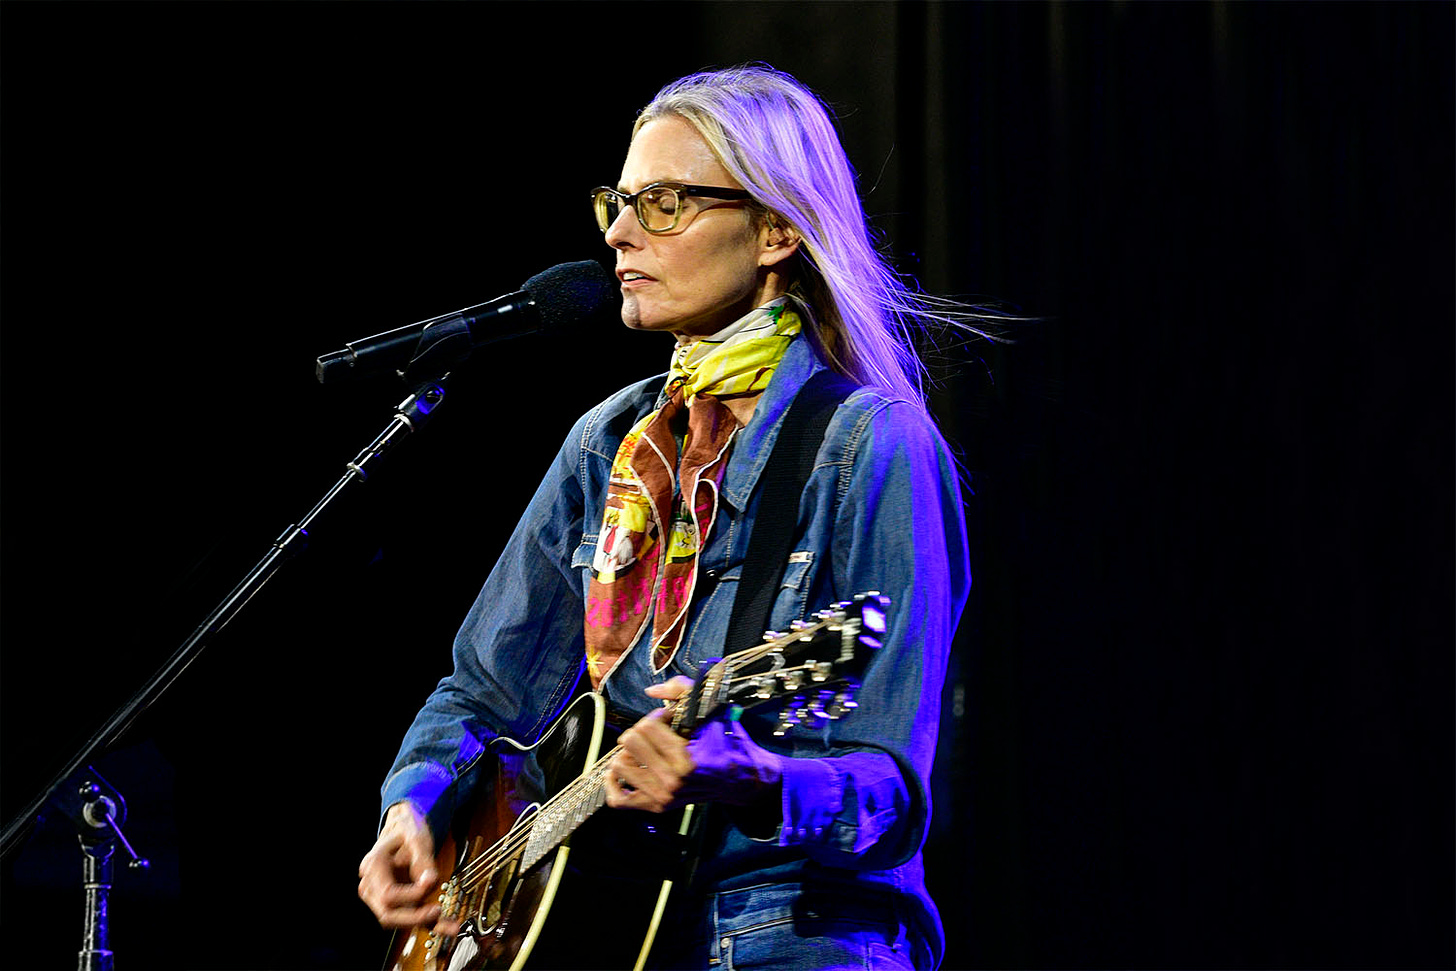 Aimee Mann performing a song from new album Queens of the Summer Hotel 2021